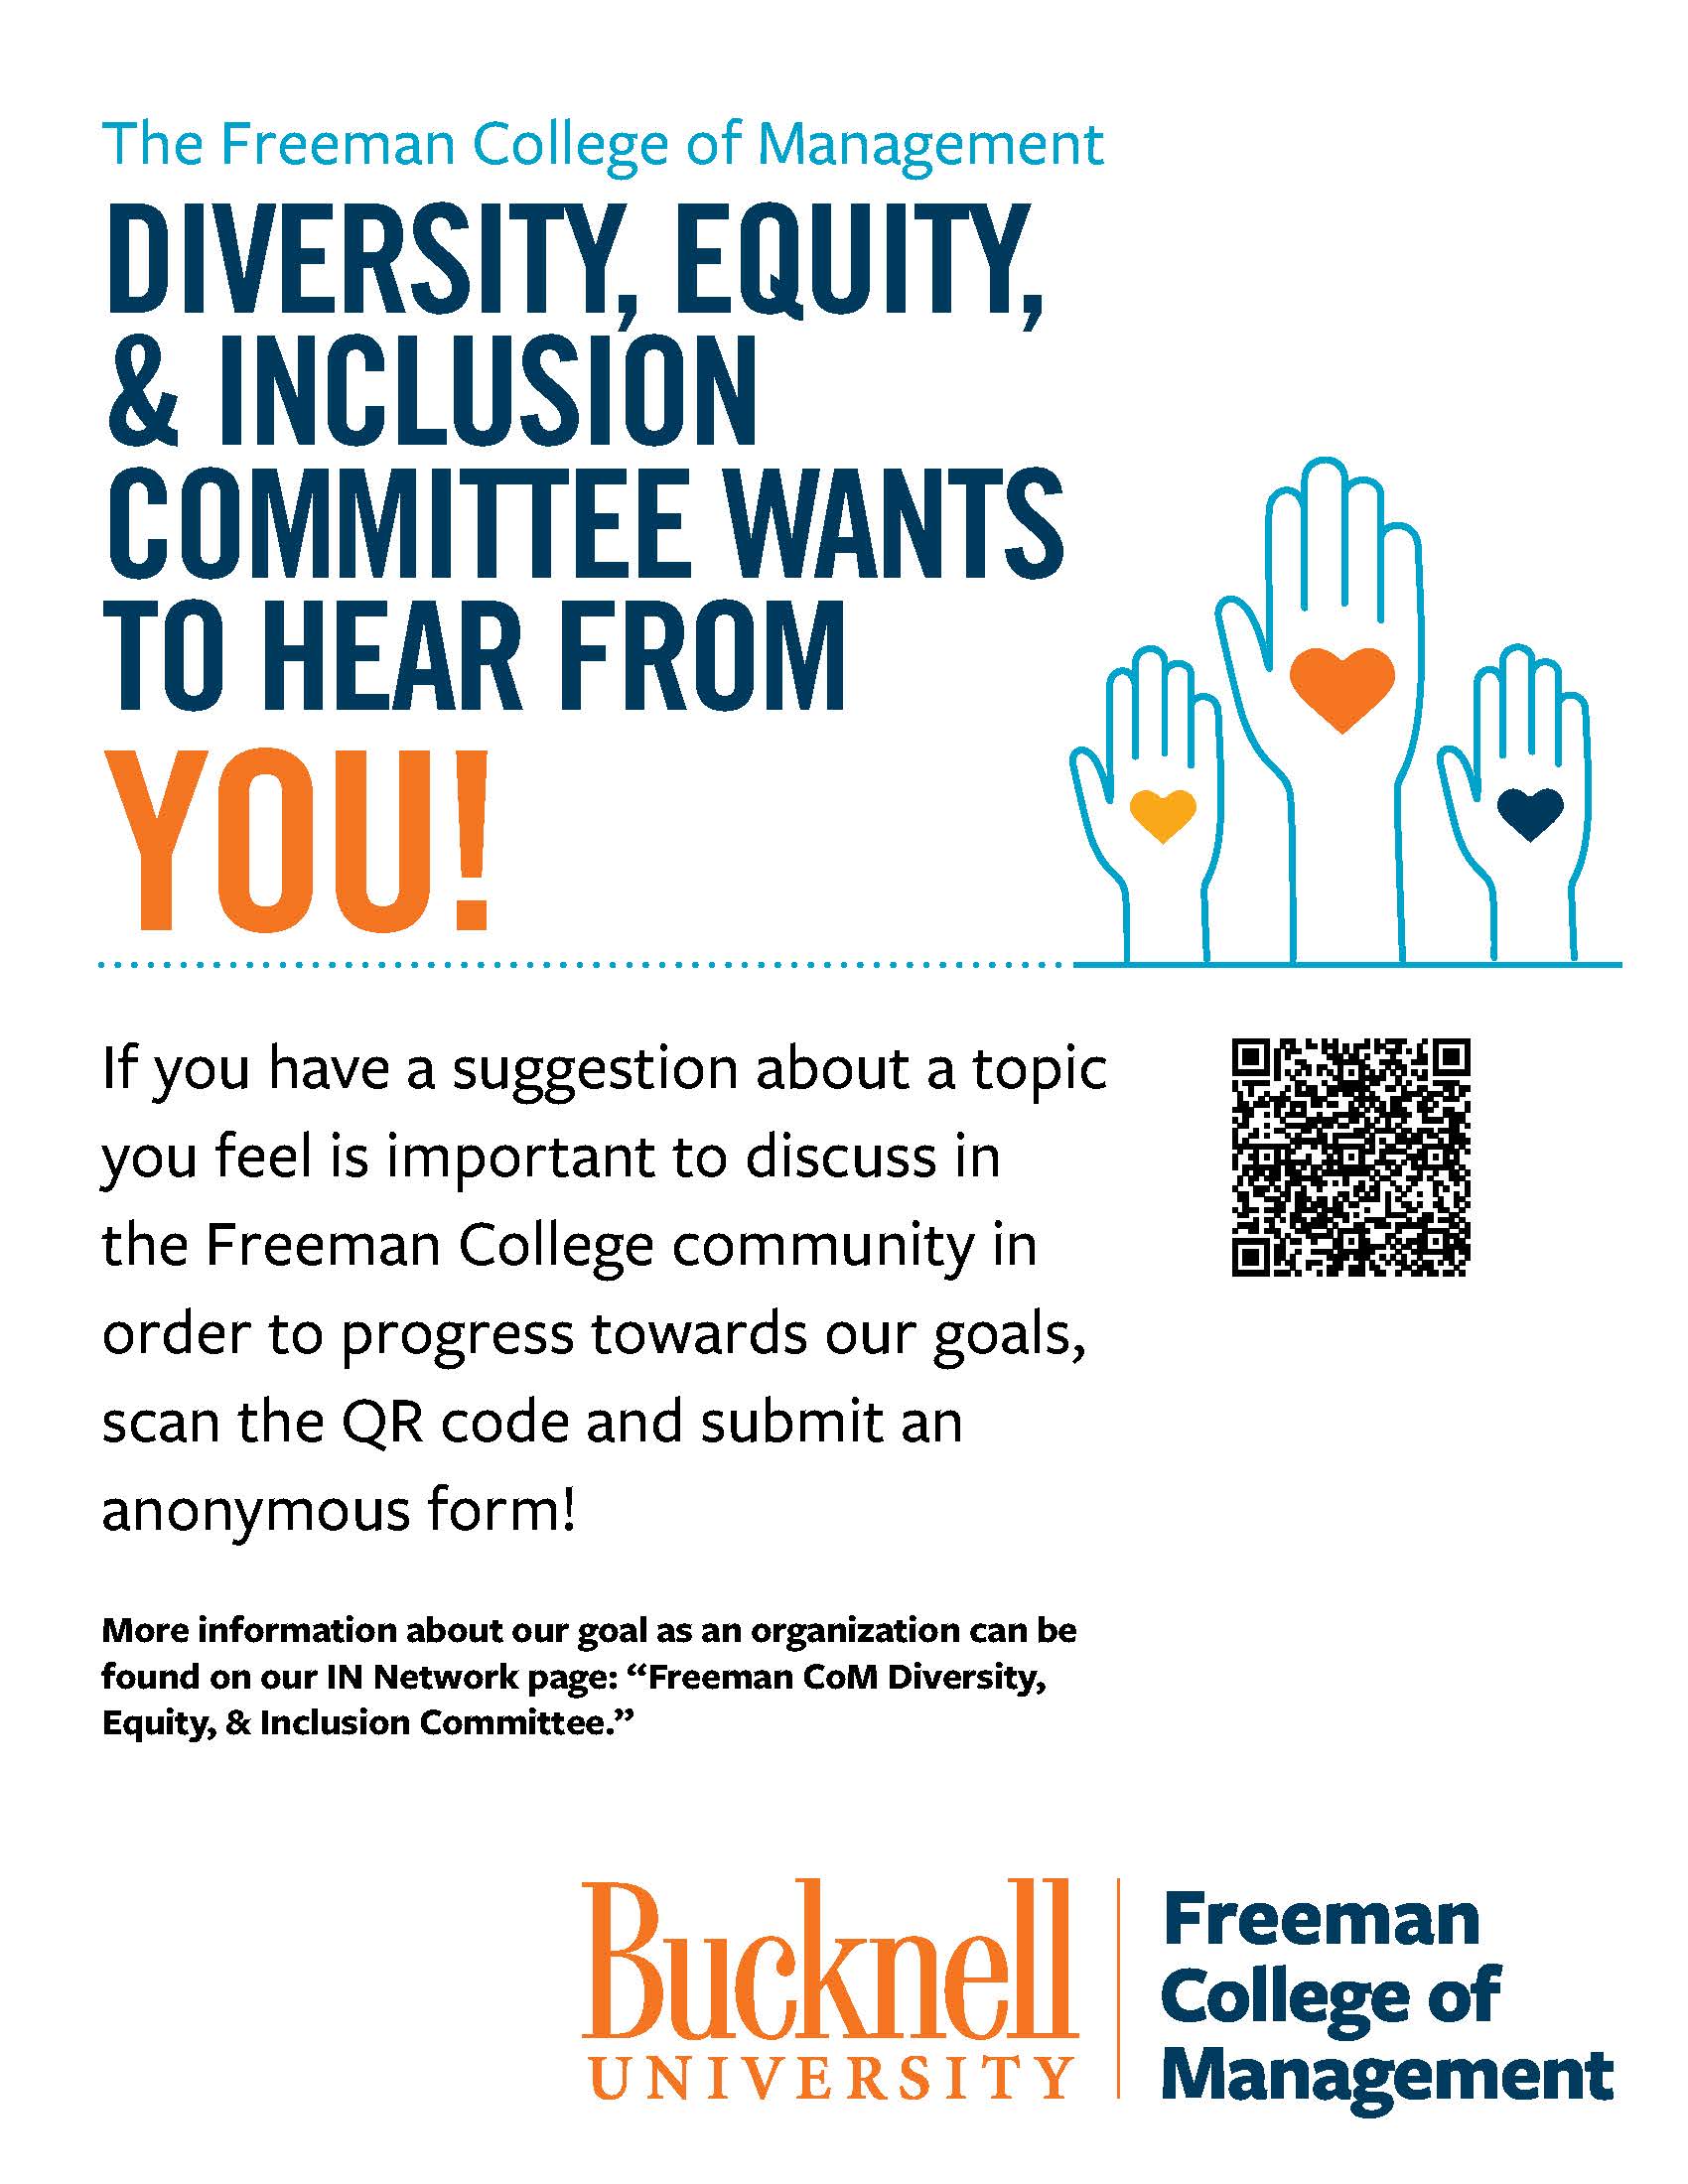 The Freeman College of Management Diversity, Equity and Inclusion Committee wants to hear from you!